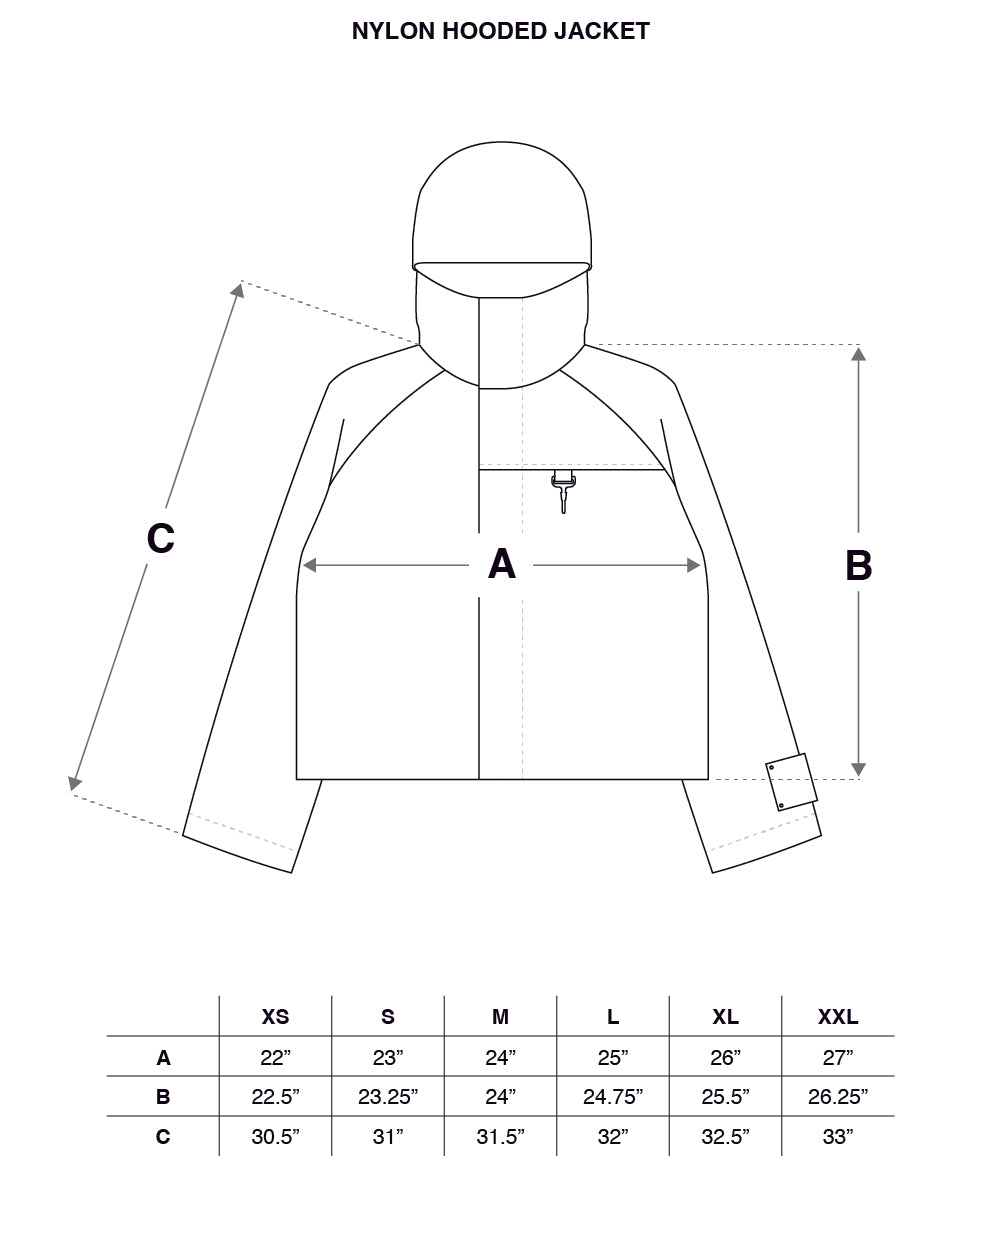 Nylon Hooded Jacket in Stone Size Guide